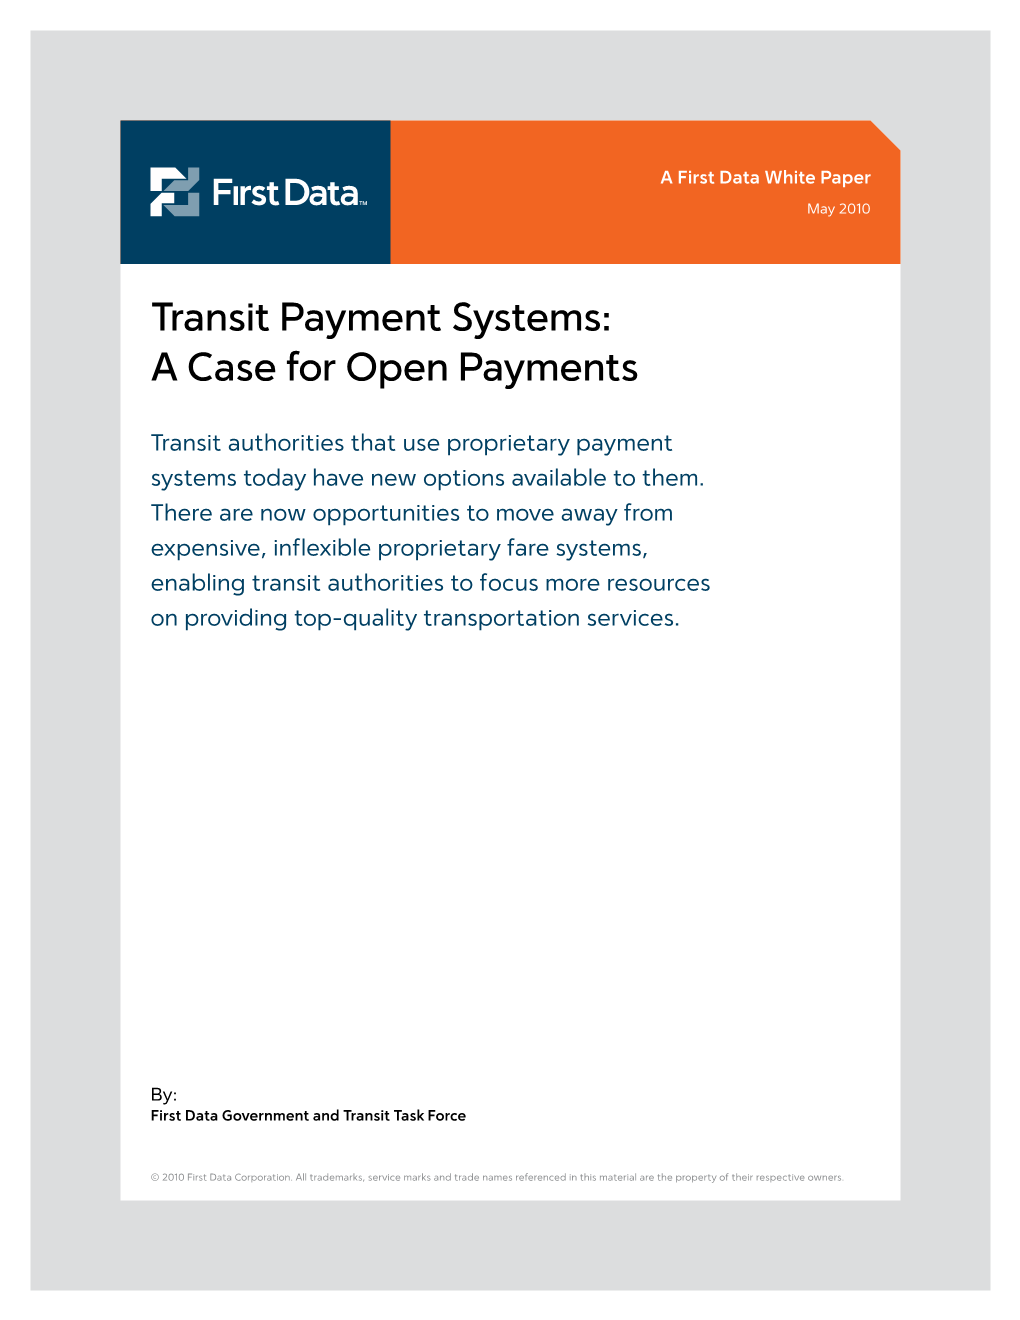 Transit Payment Systems: a Case for Open Payments